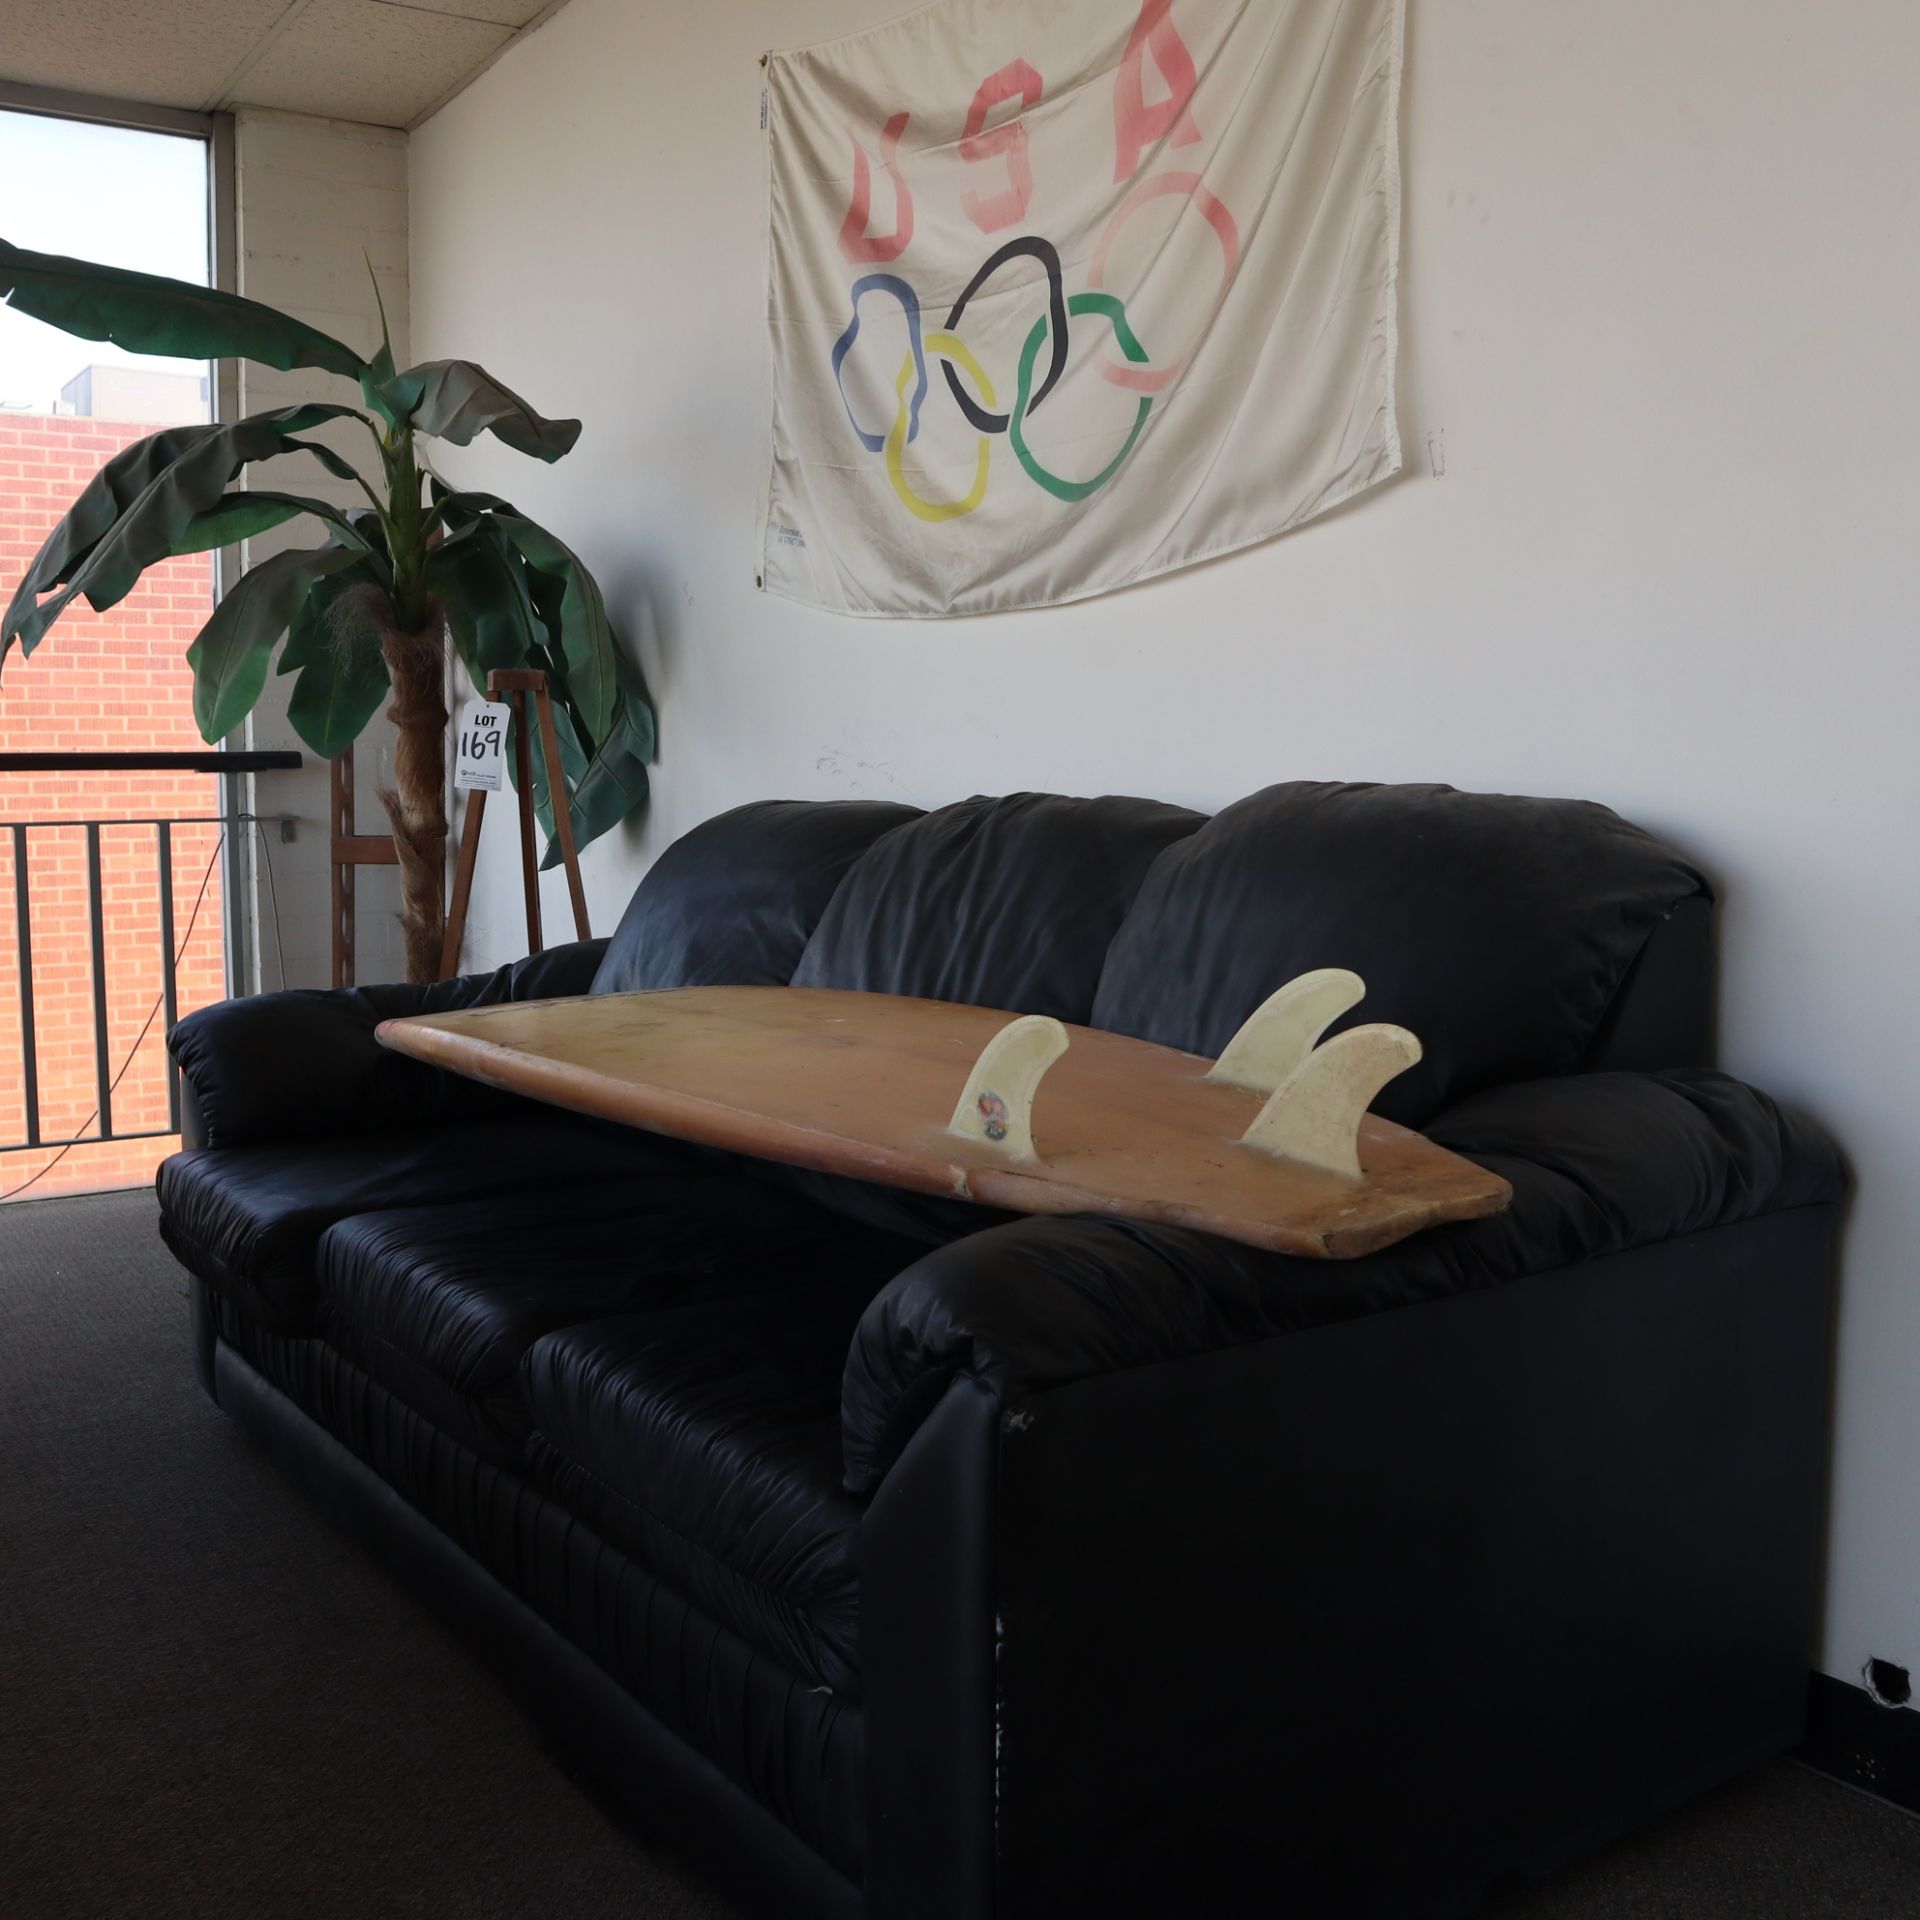 UPSTAIRS LOUNGE AREA TO INCLUDE: (1) BLACK SOFA, (1) SURFBOARD, (1) DECORATIVE PALM TREE